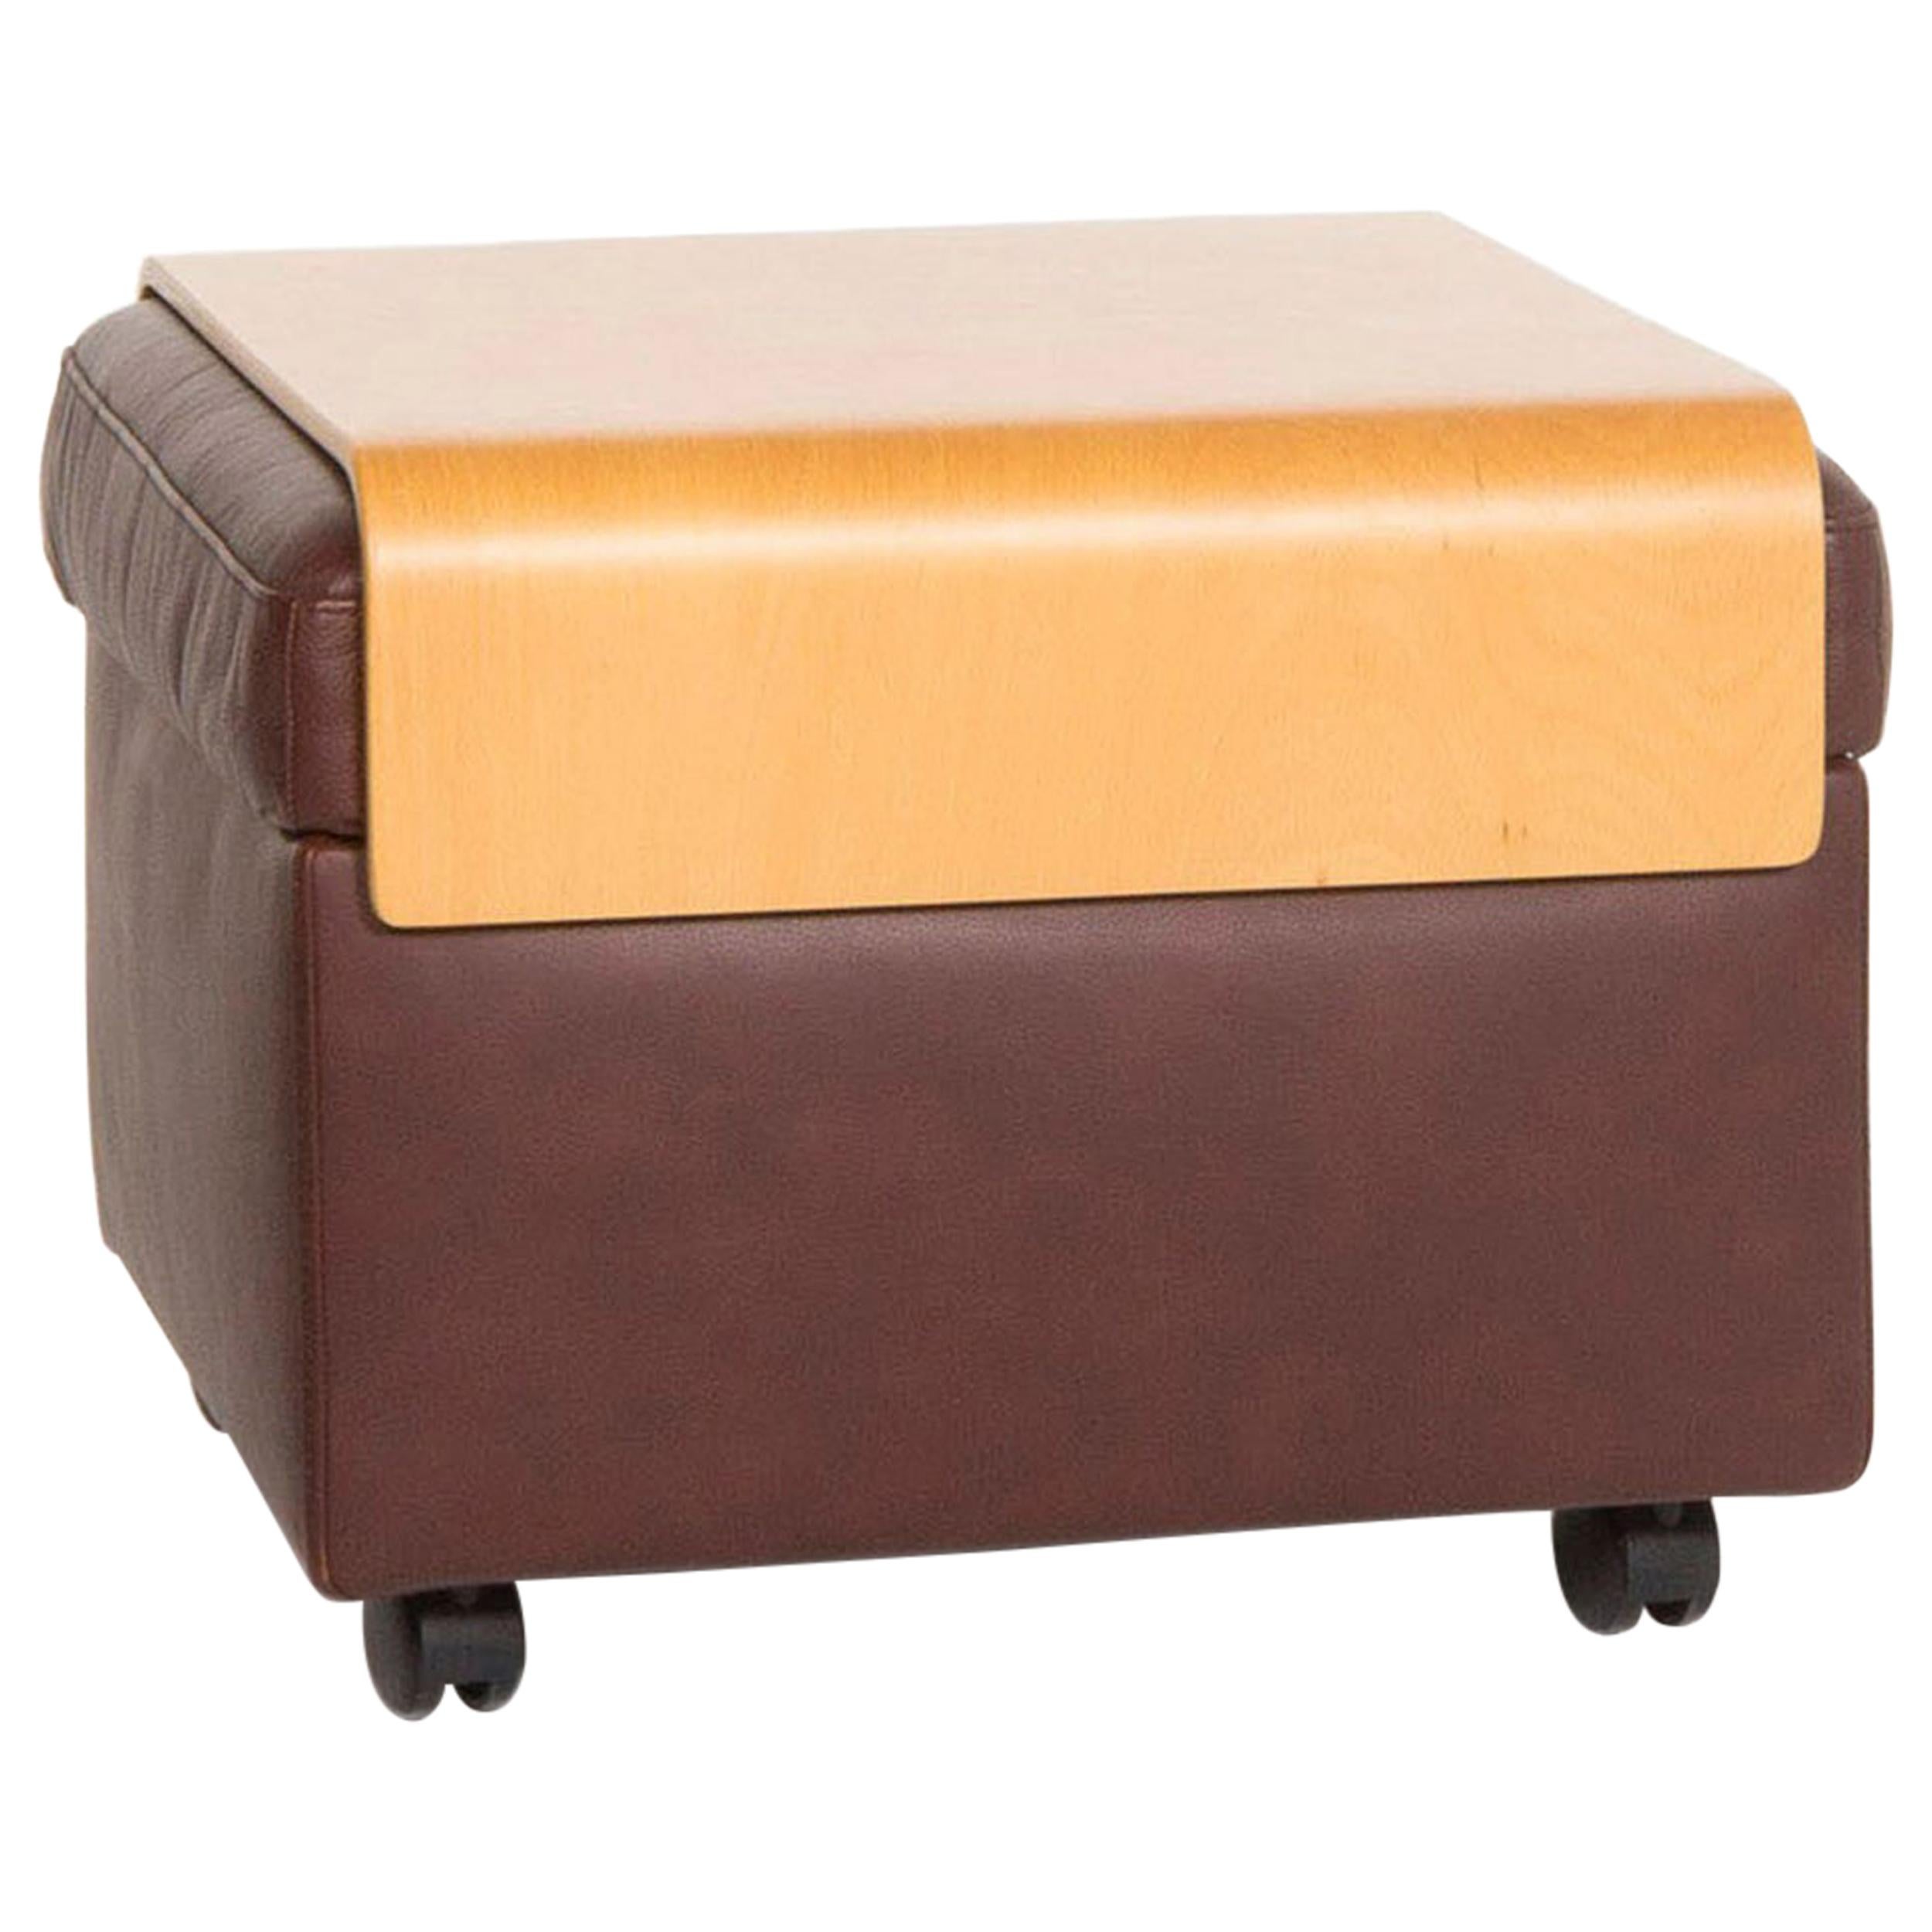 Stressless Paradise Leather Stool Dark Brown Including Storage Space